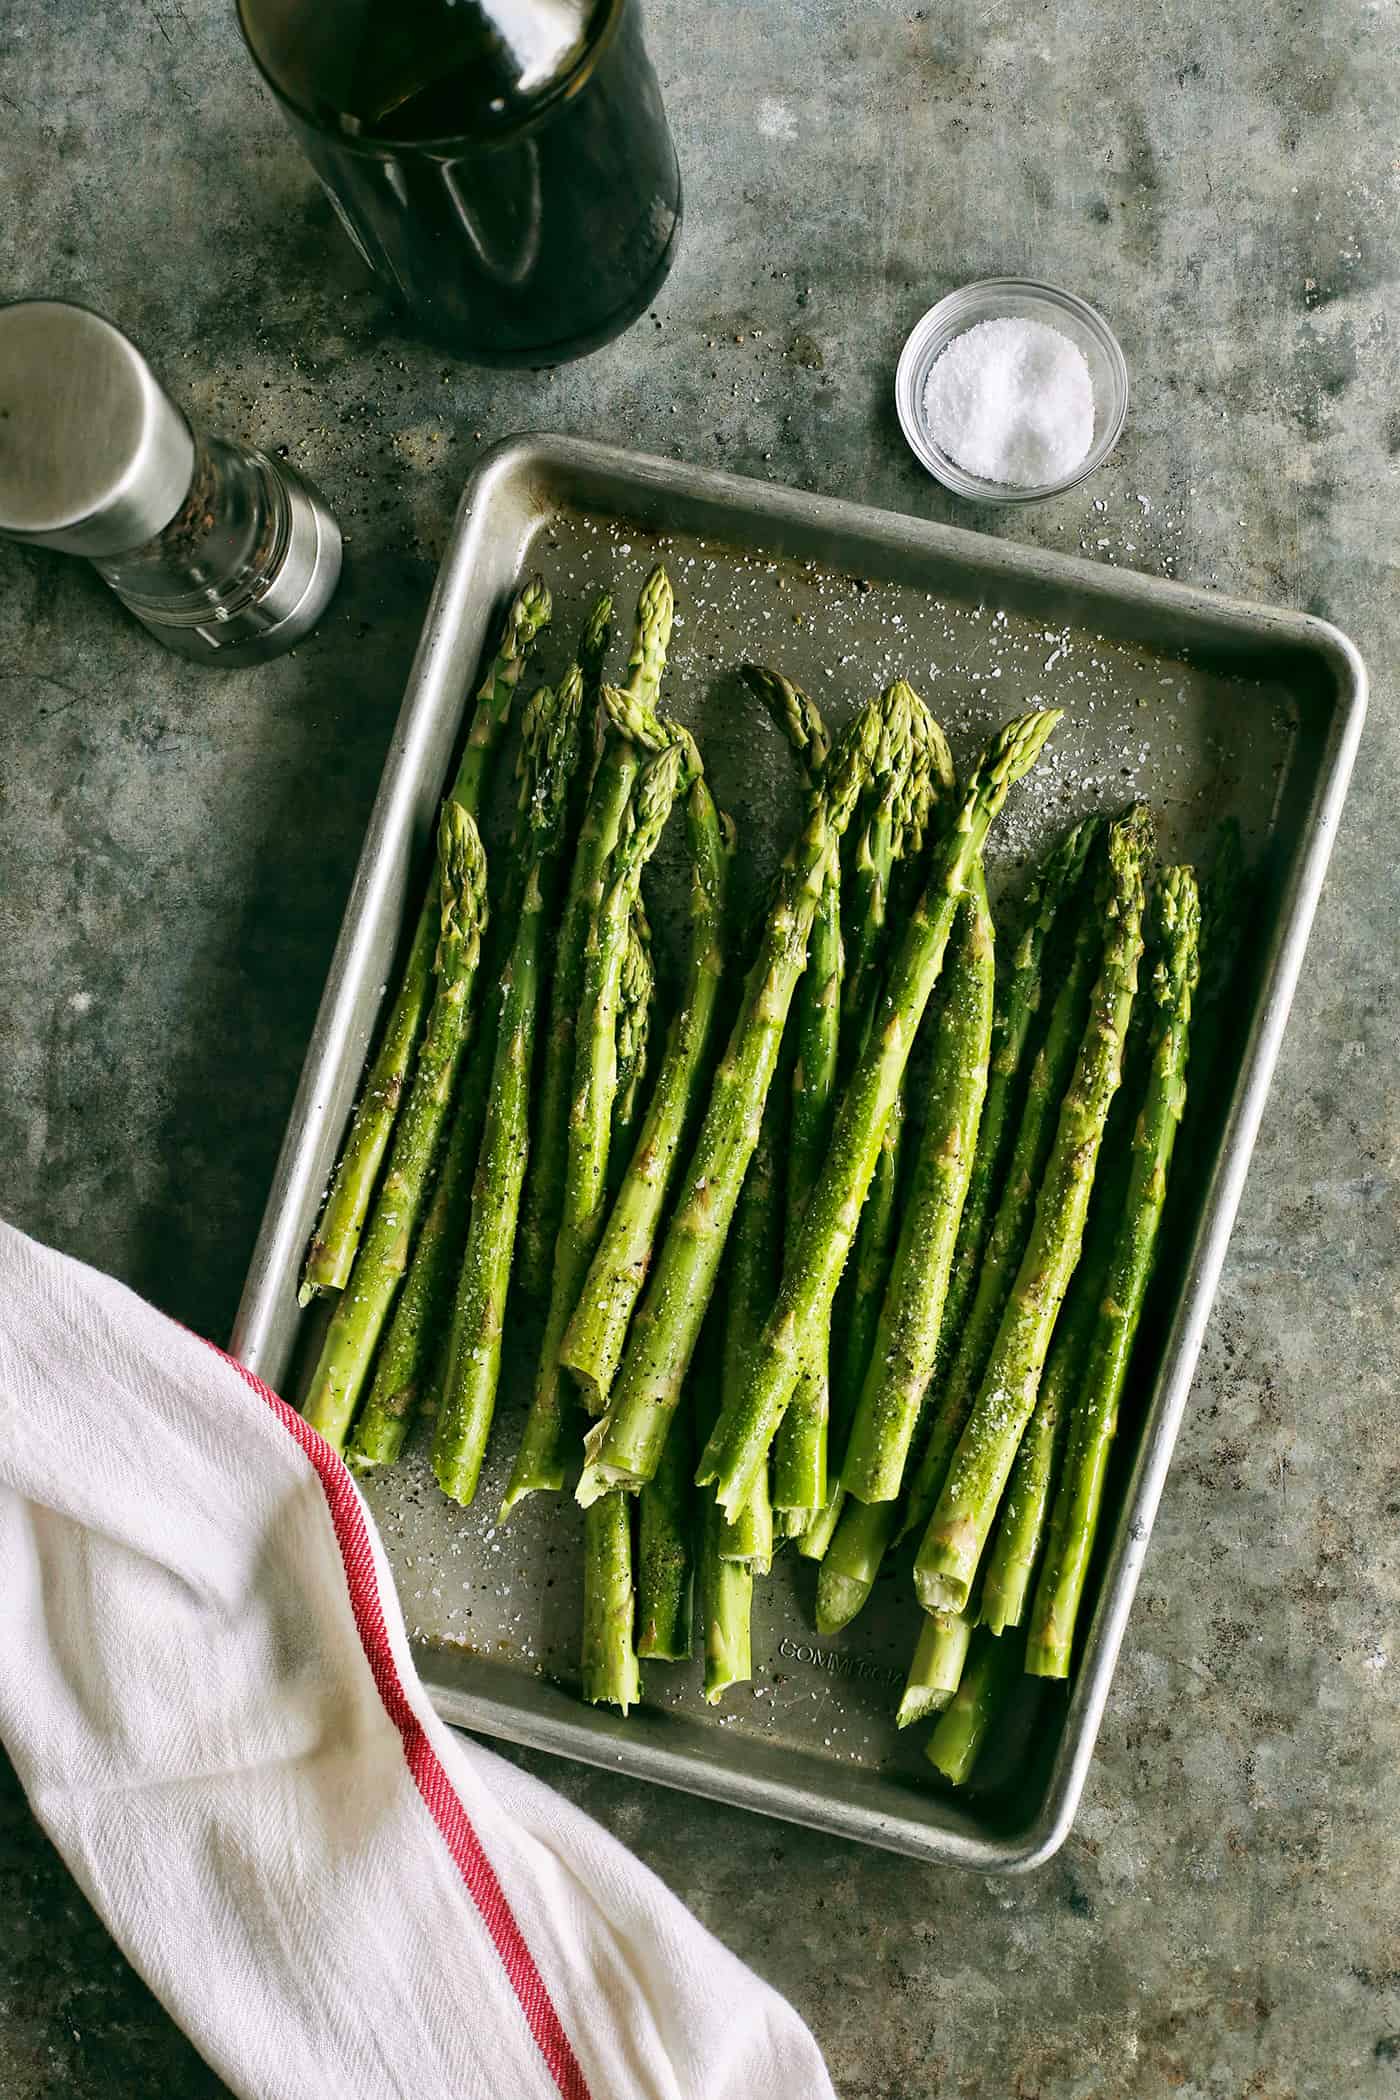 Trimmed asparagus in a baking sheet